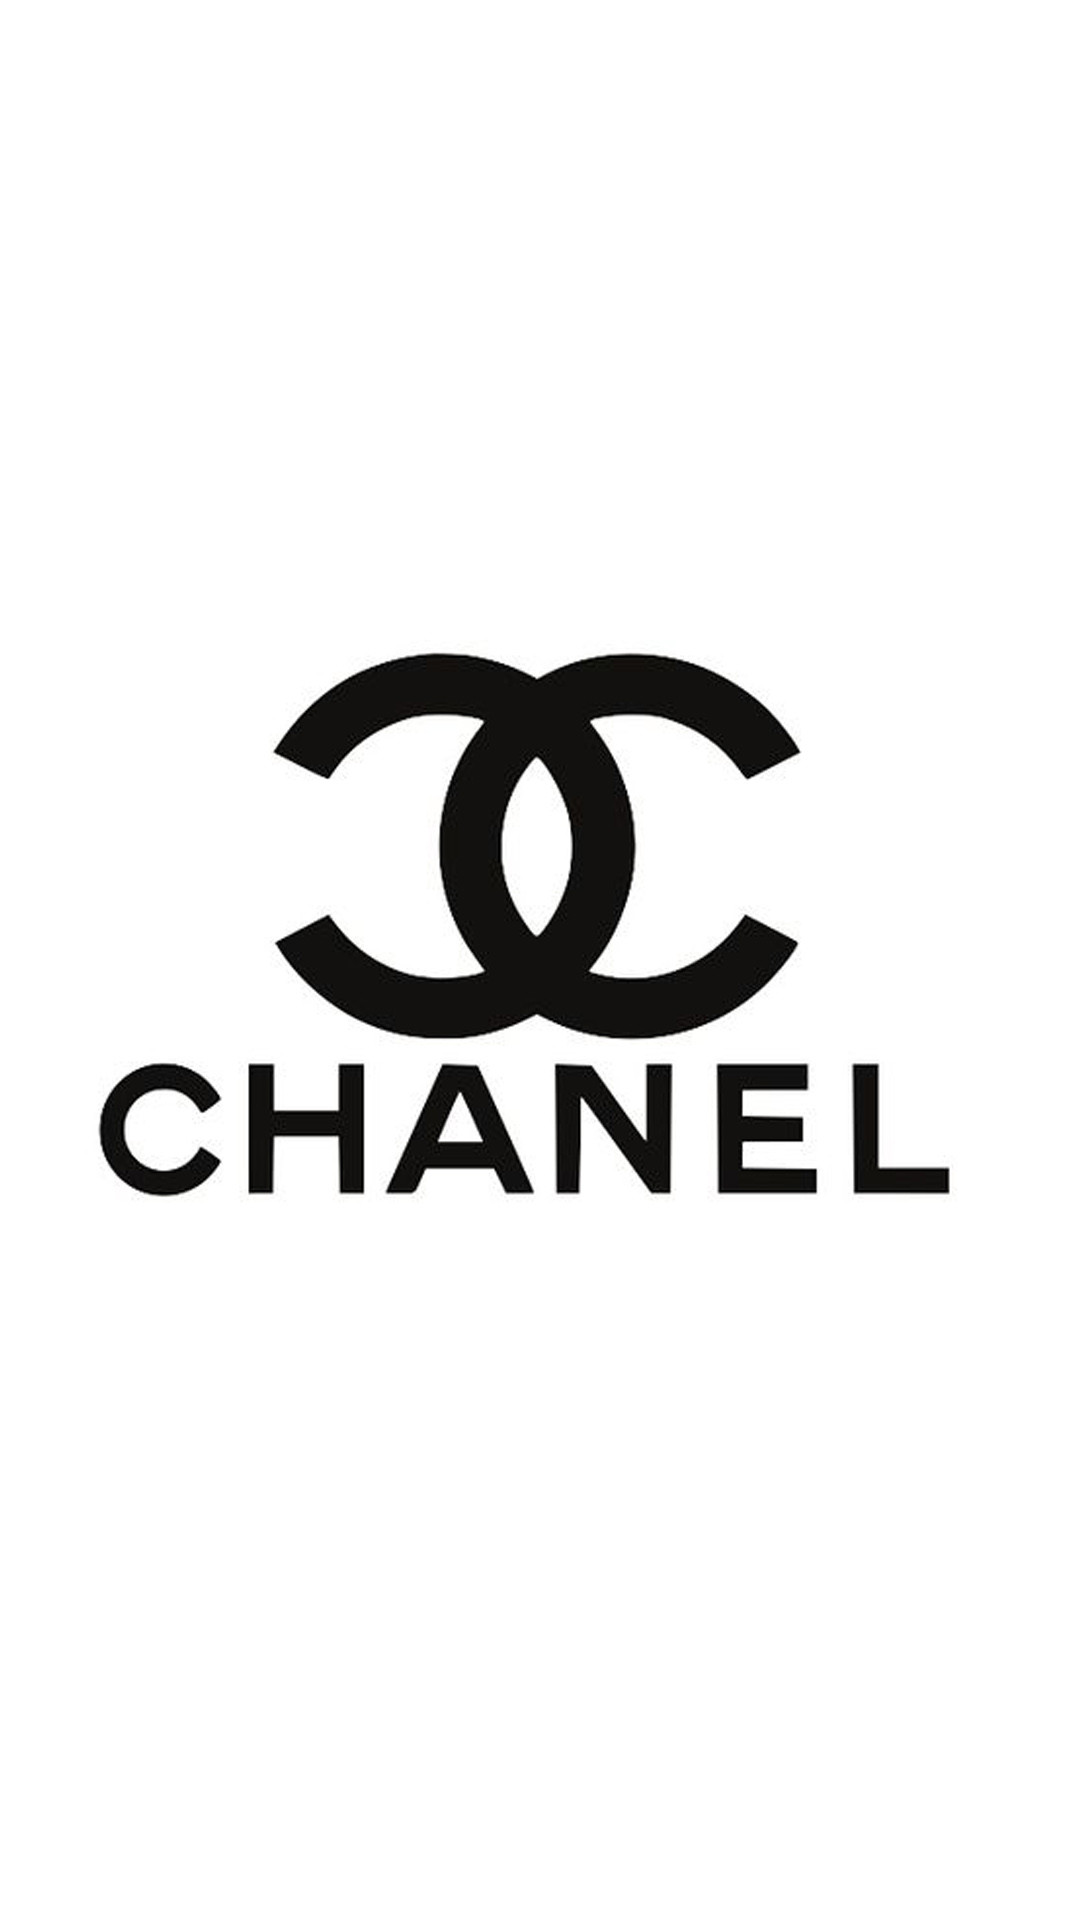 1080x1920 Chanel iPhone X backgrounds.